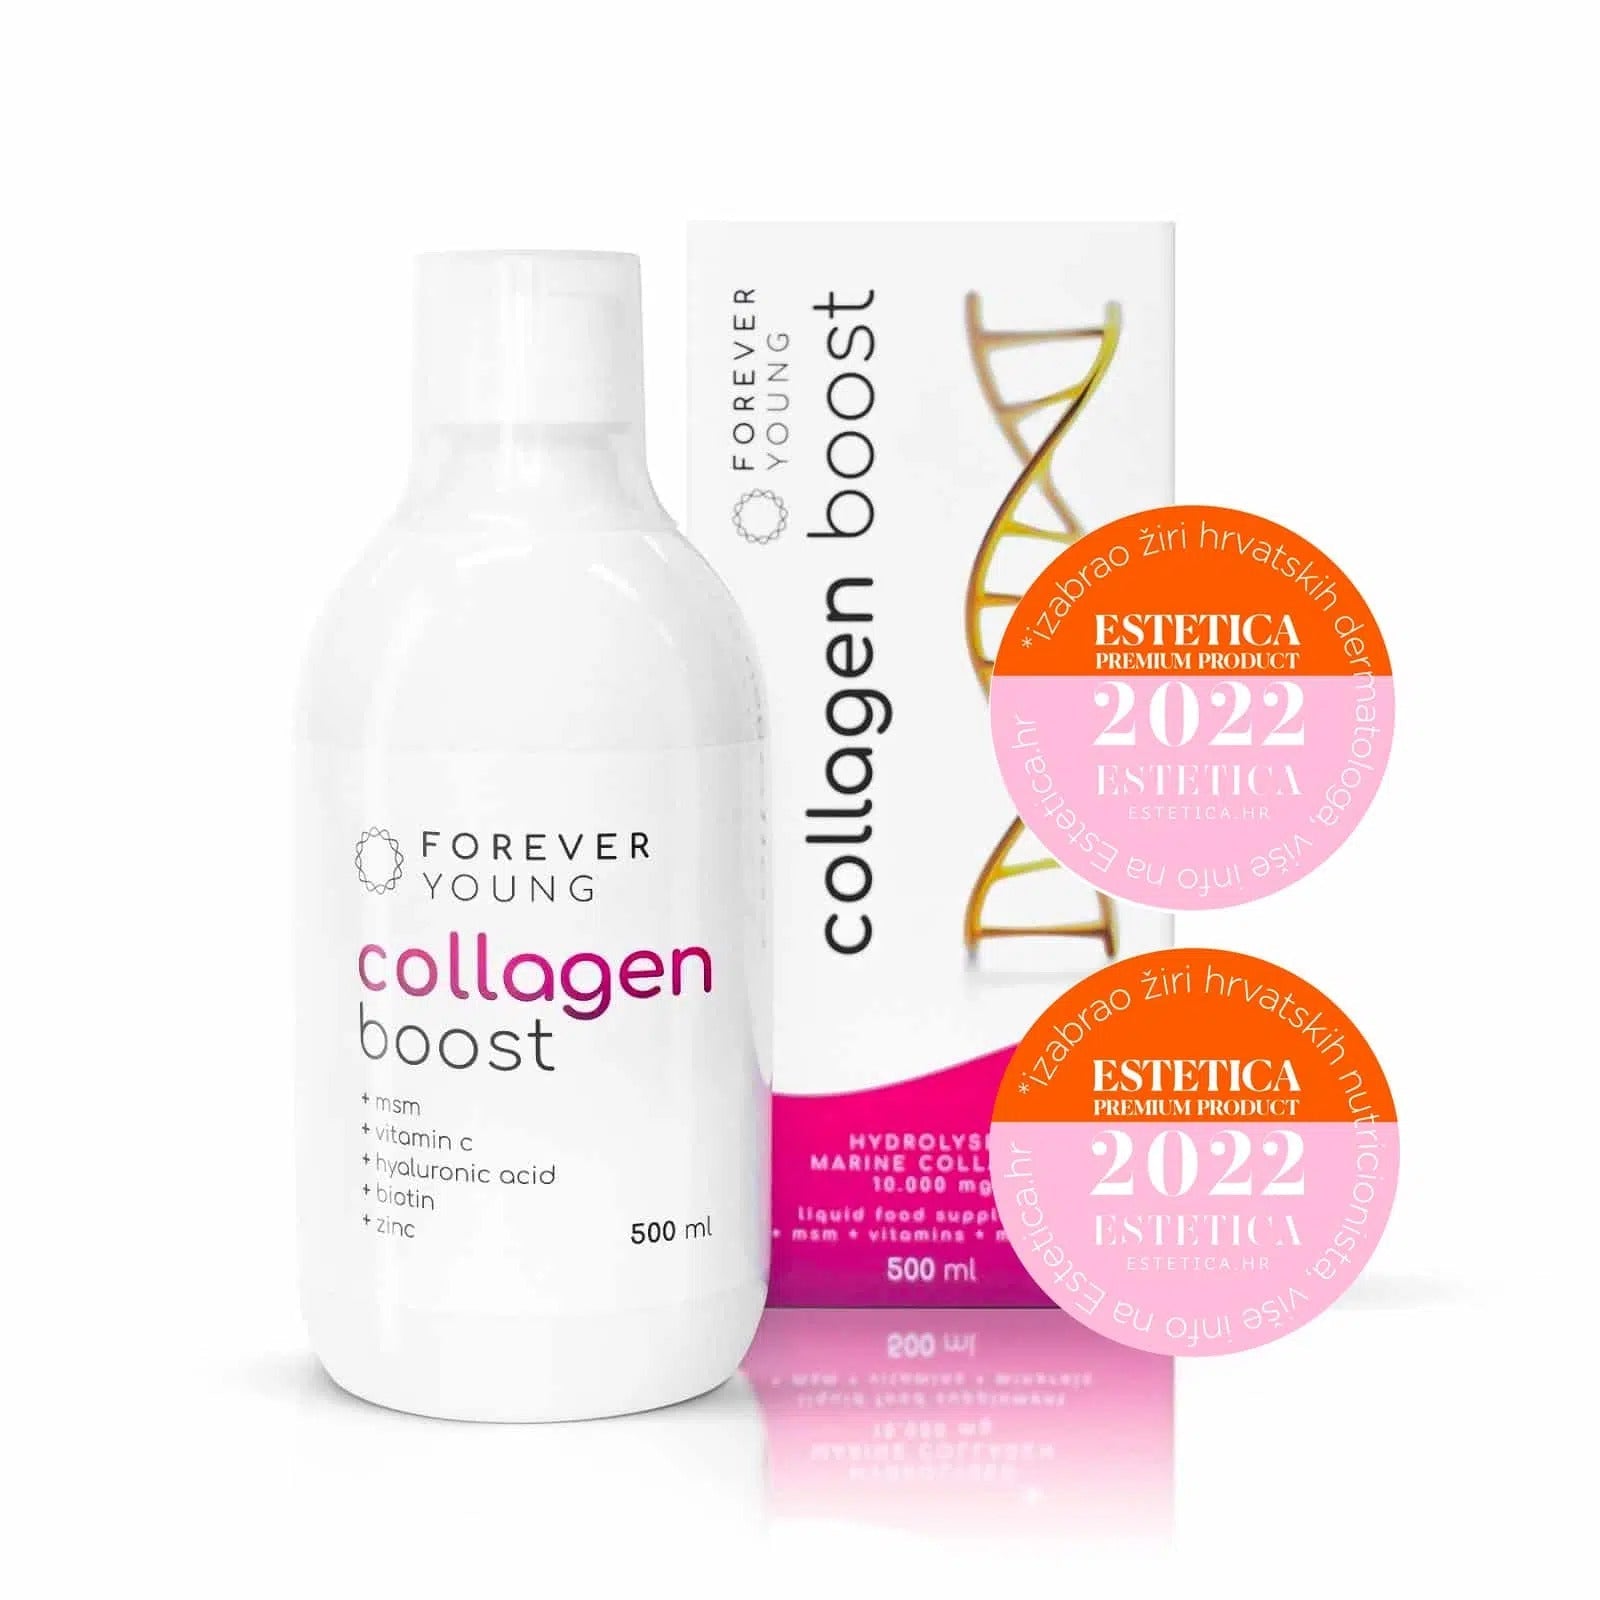 COLLAGEN BOOST - buy 2 get 1 FOR FREE! + FREE GUMMIES!